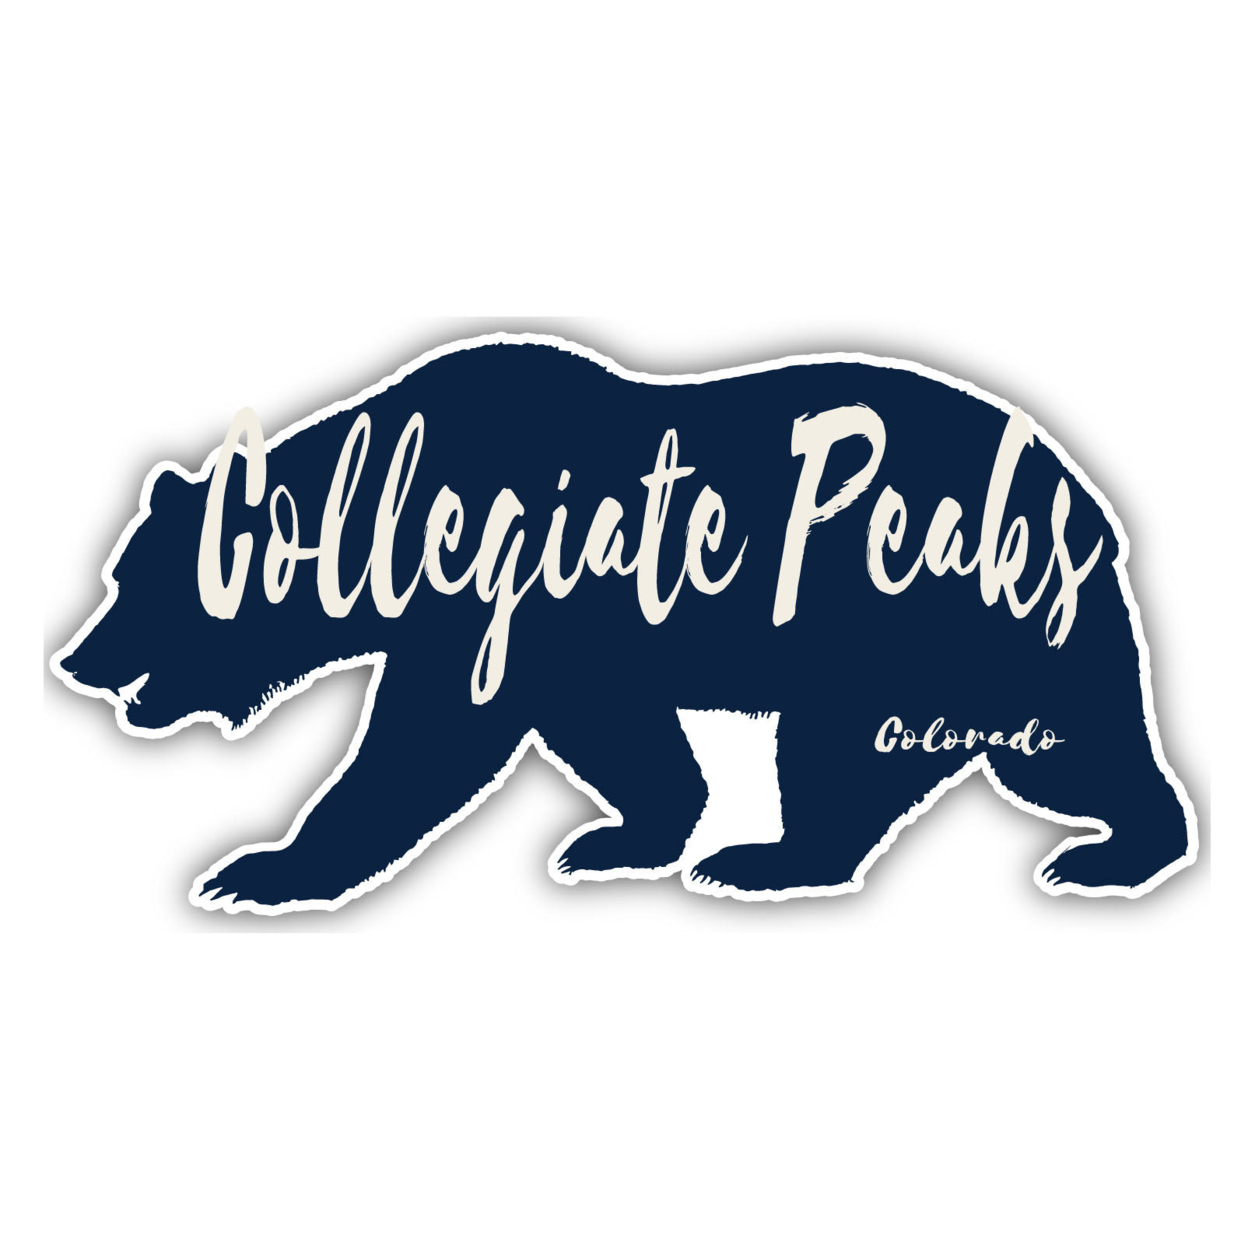 Collegiate Peaks Colorado Souvenir Decorative Stickers (Choose Theme And Size) - 4-Pack, 10-Inch, Camp Life